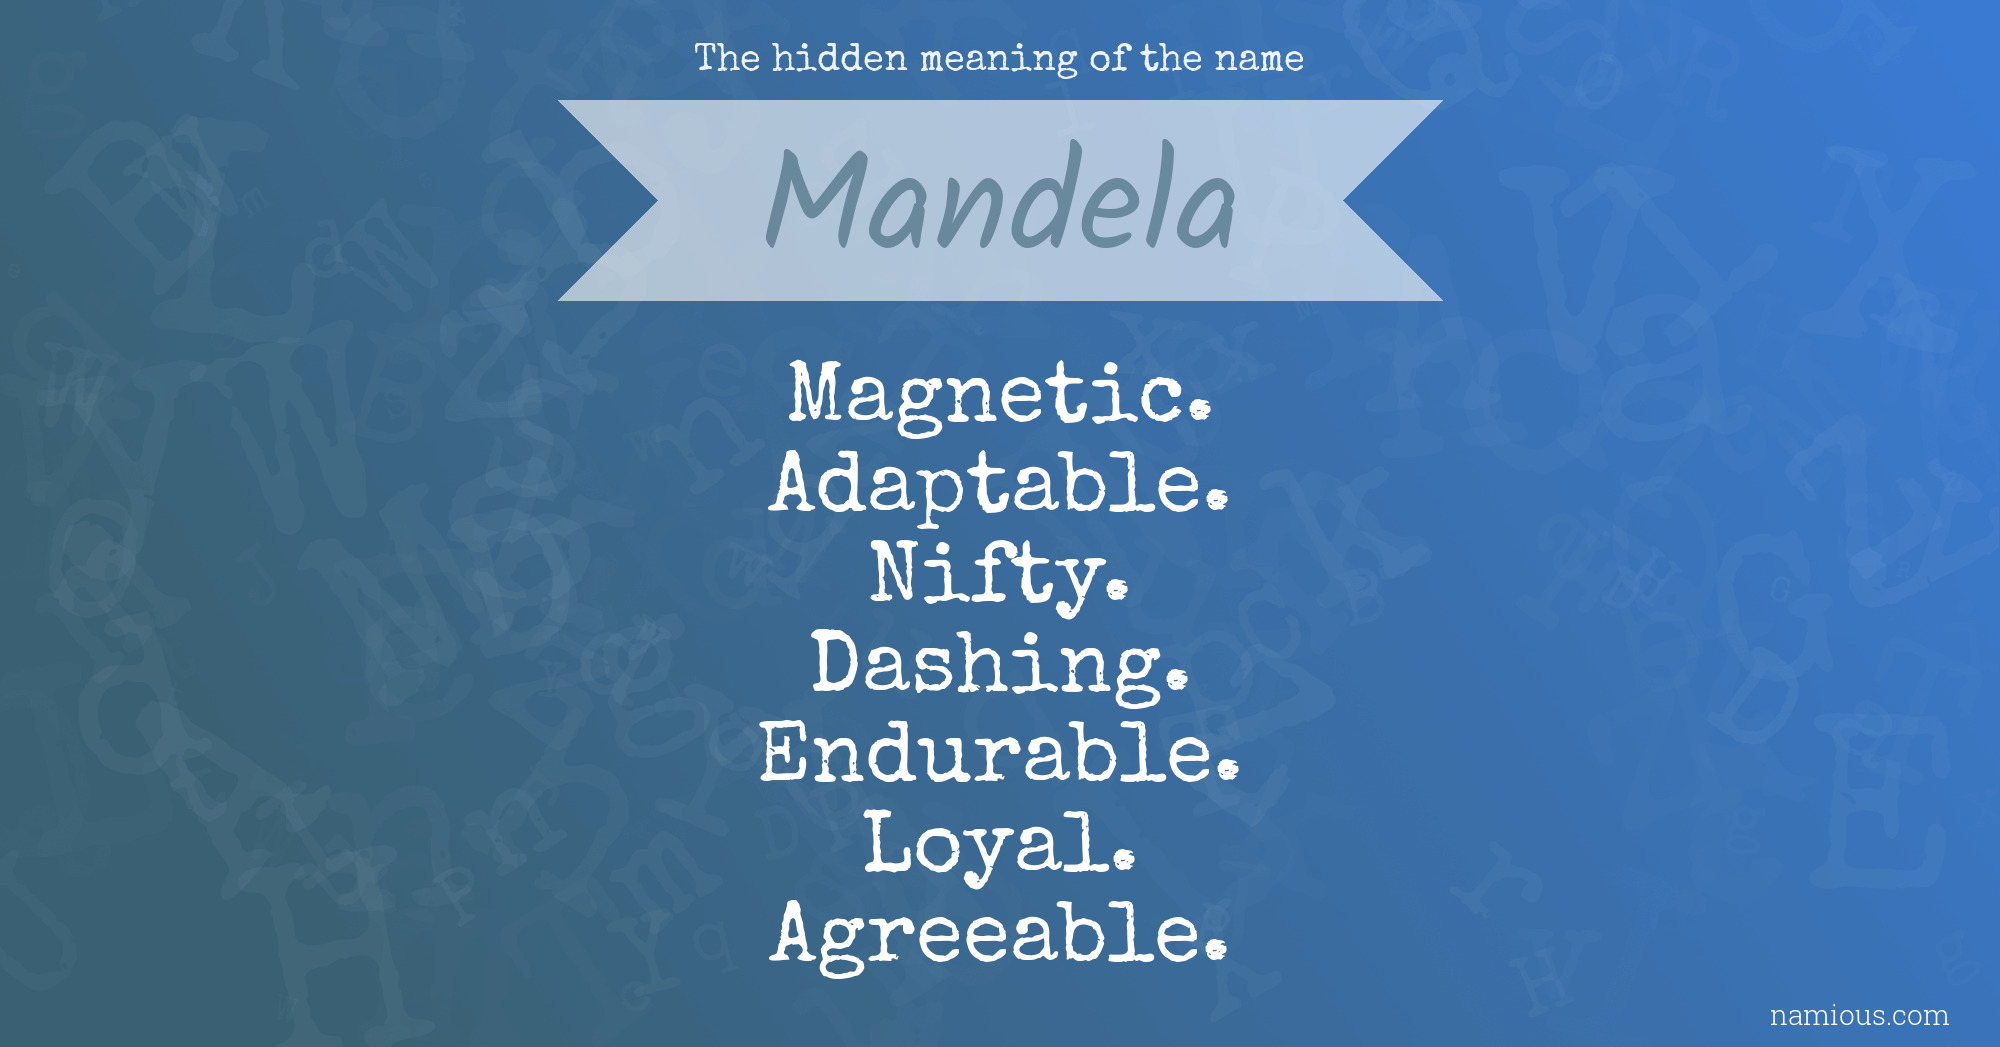 The hidden meaning of the name Mandela